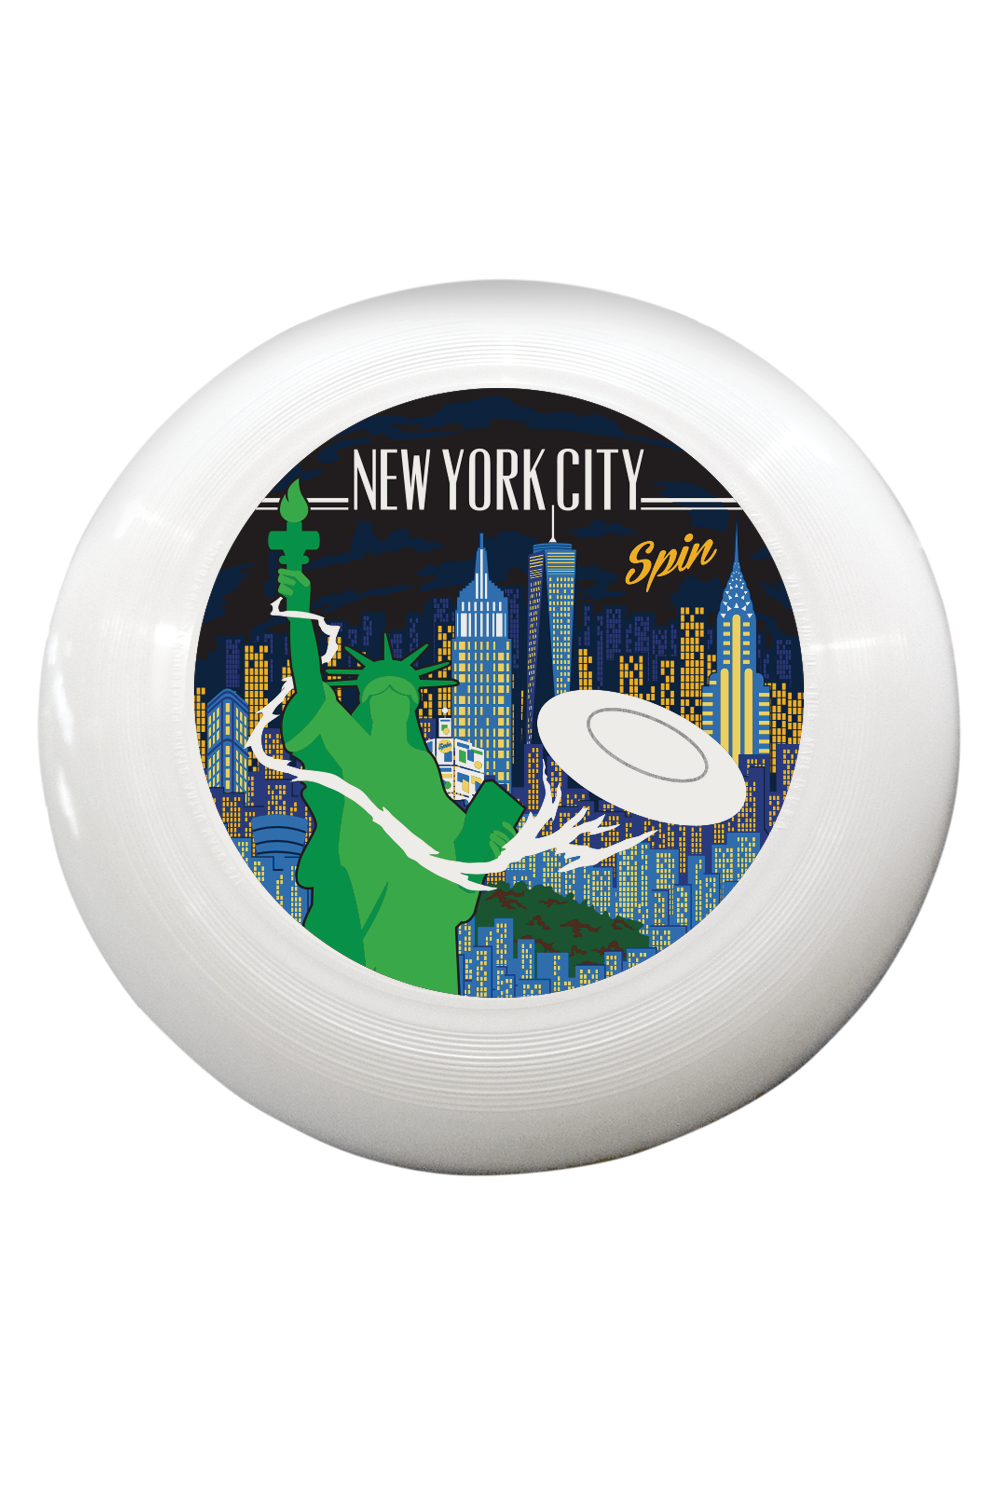 Where Can I Buy a Frisbee in Nyc  